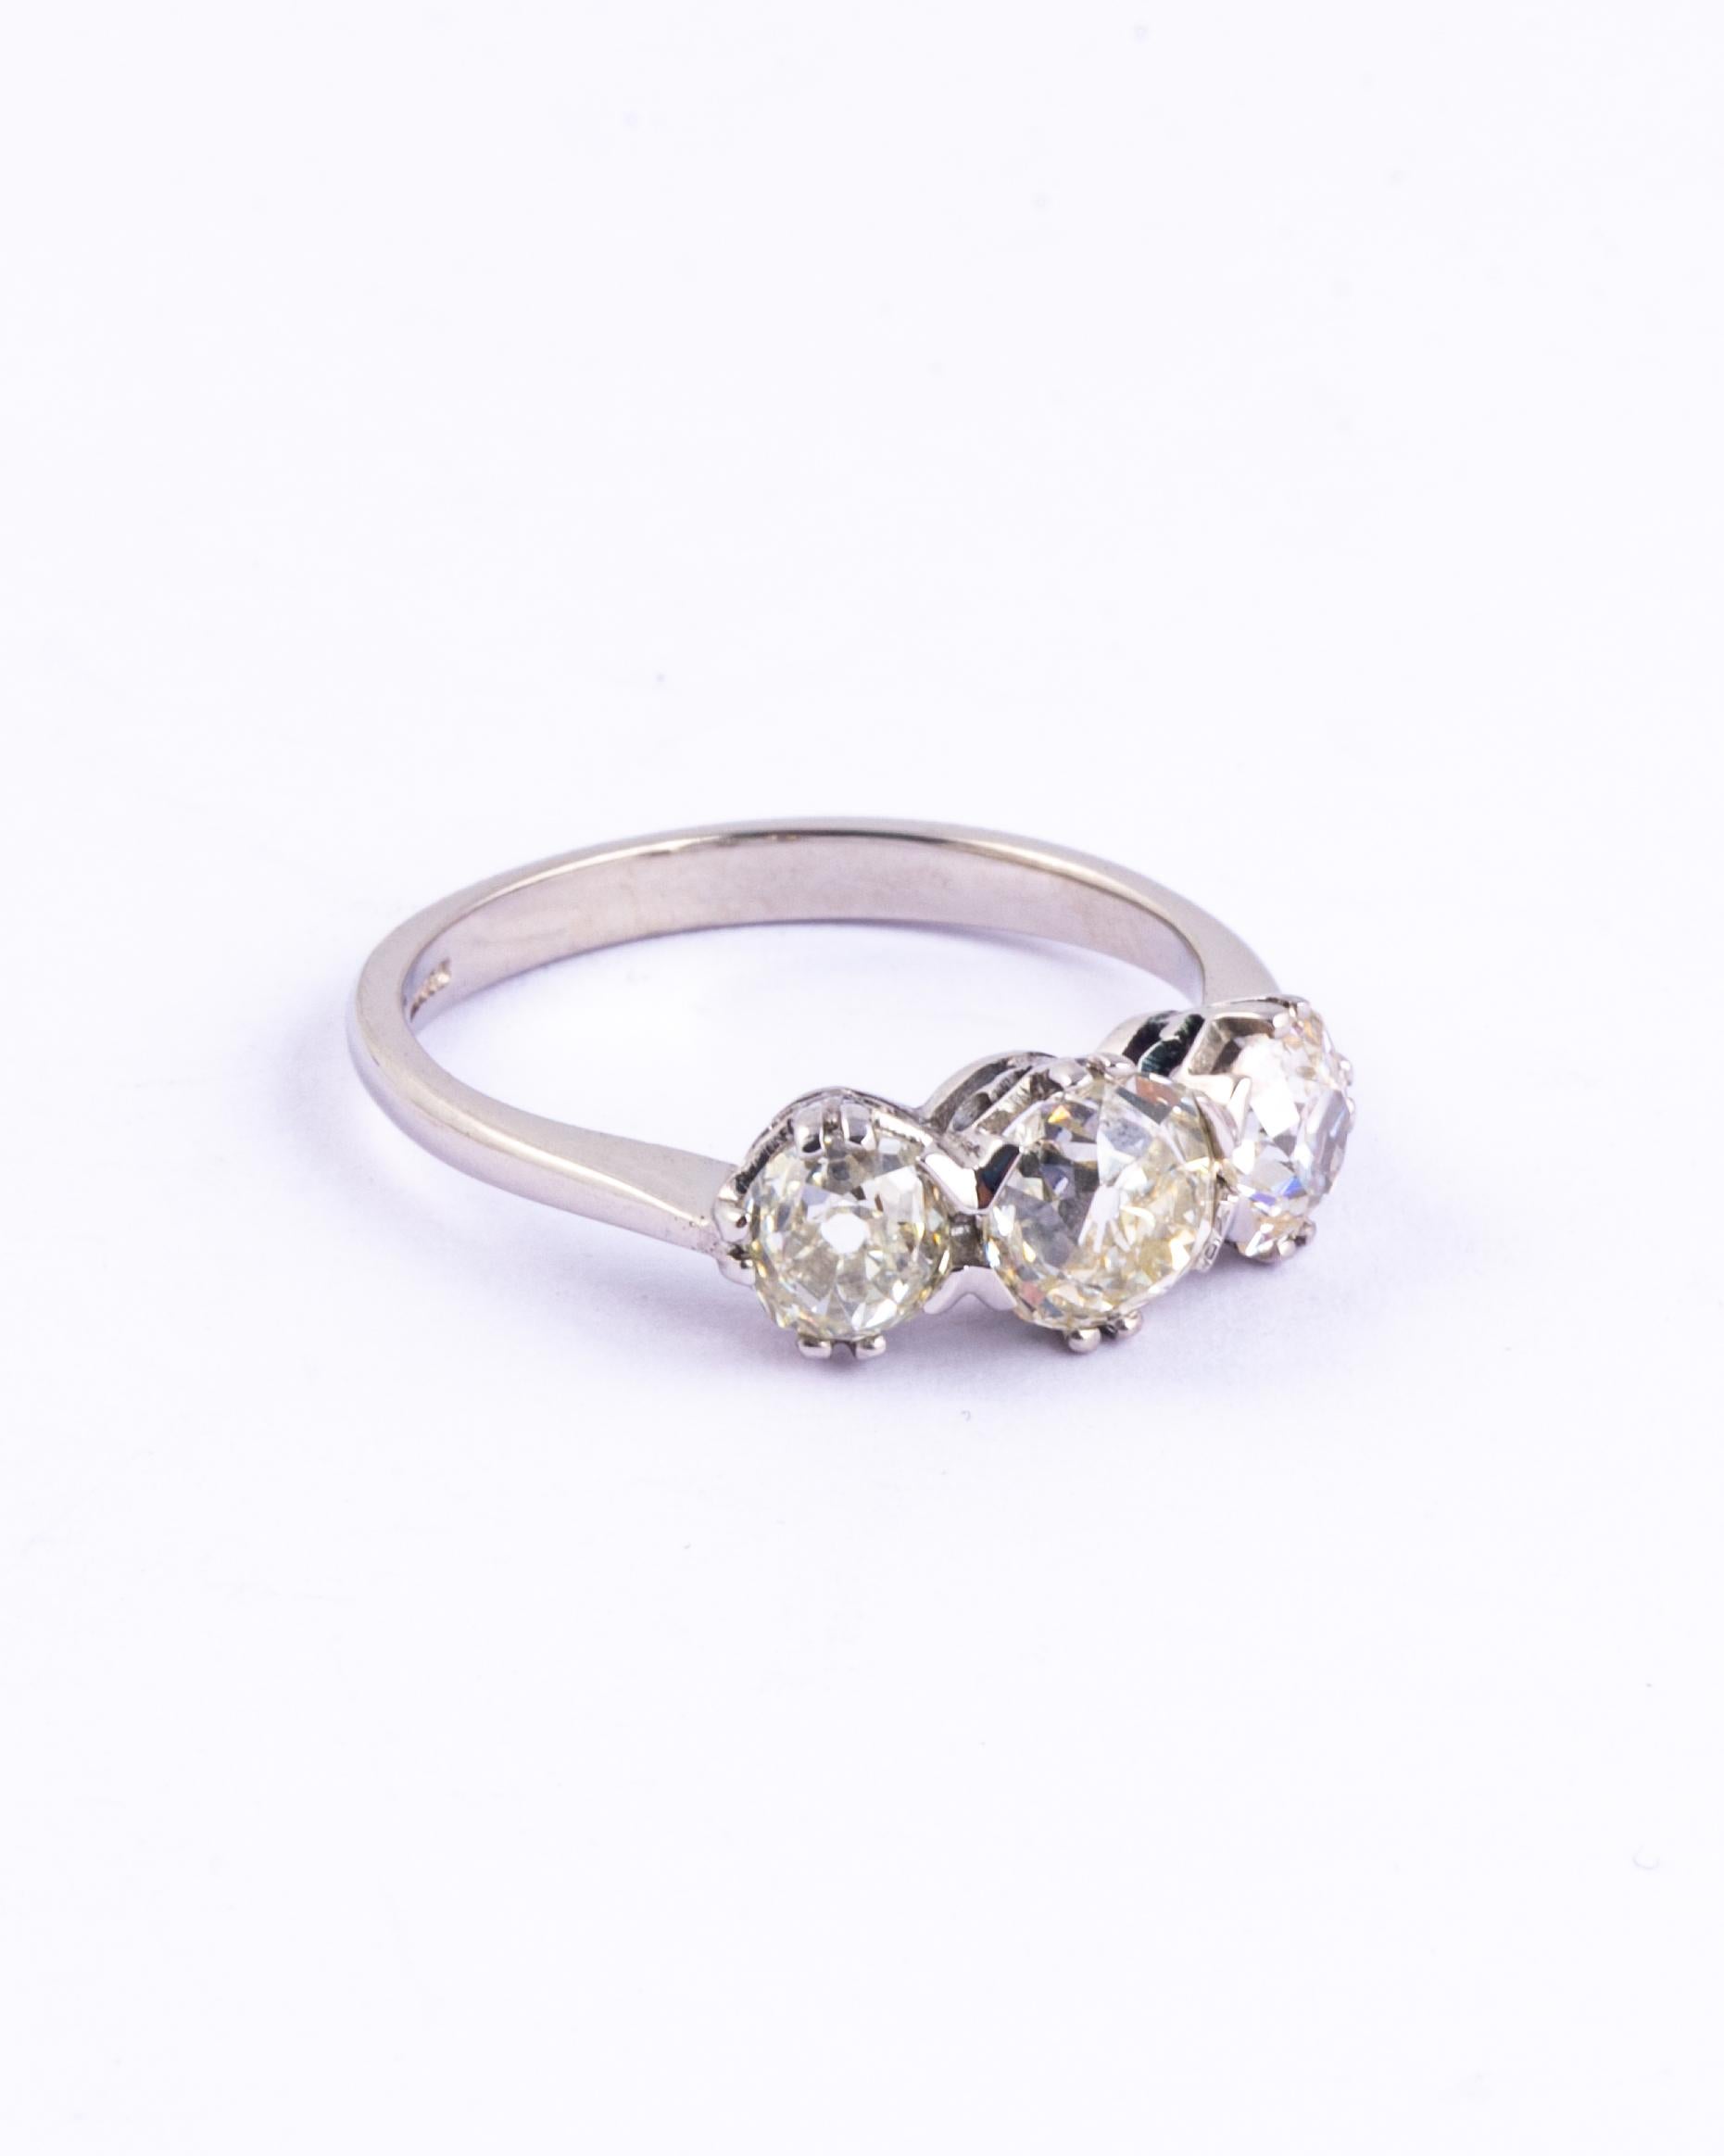 The three gorgeous diamonds in this ring are bright and have a wonderful sparkle. The central stone measures 1.11ct, and the two outer stones measure 60pts and 65pts. All diamonds are H colour VS2 and old mine cut. Set in simple claw settings this